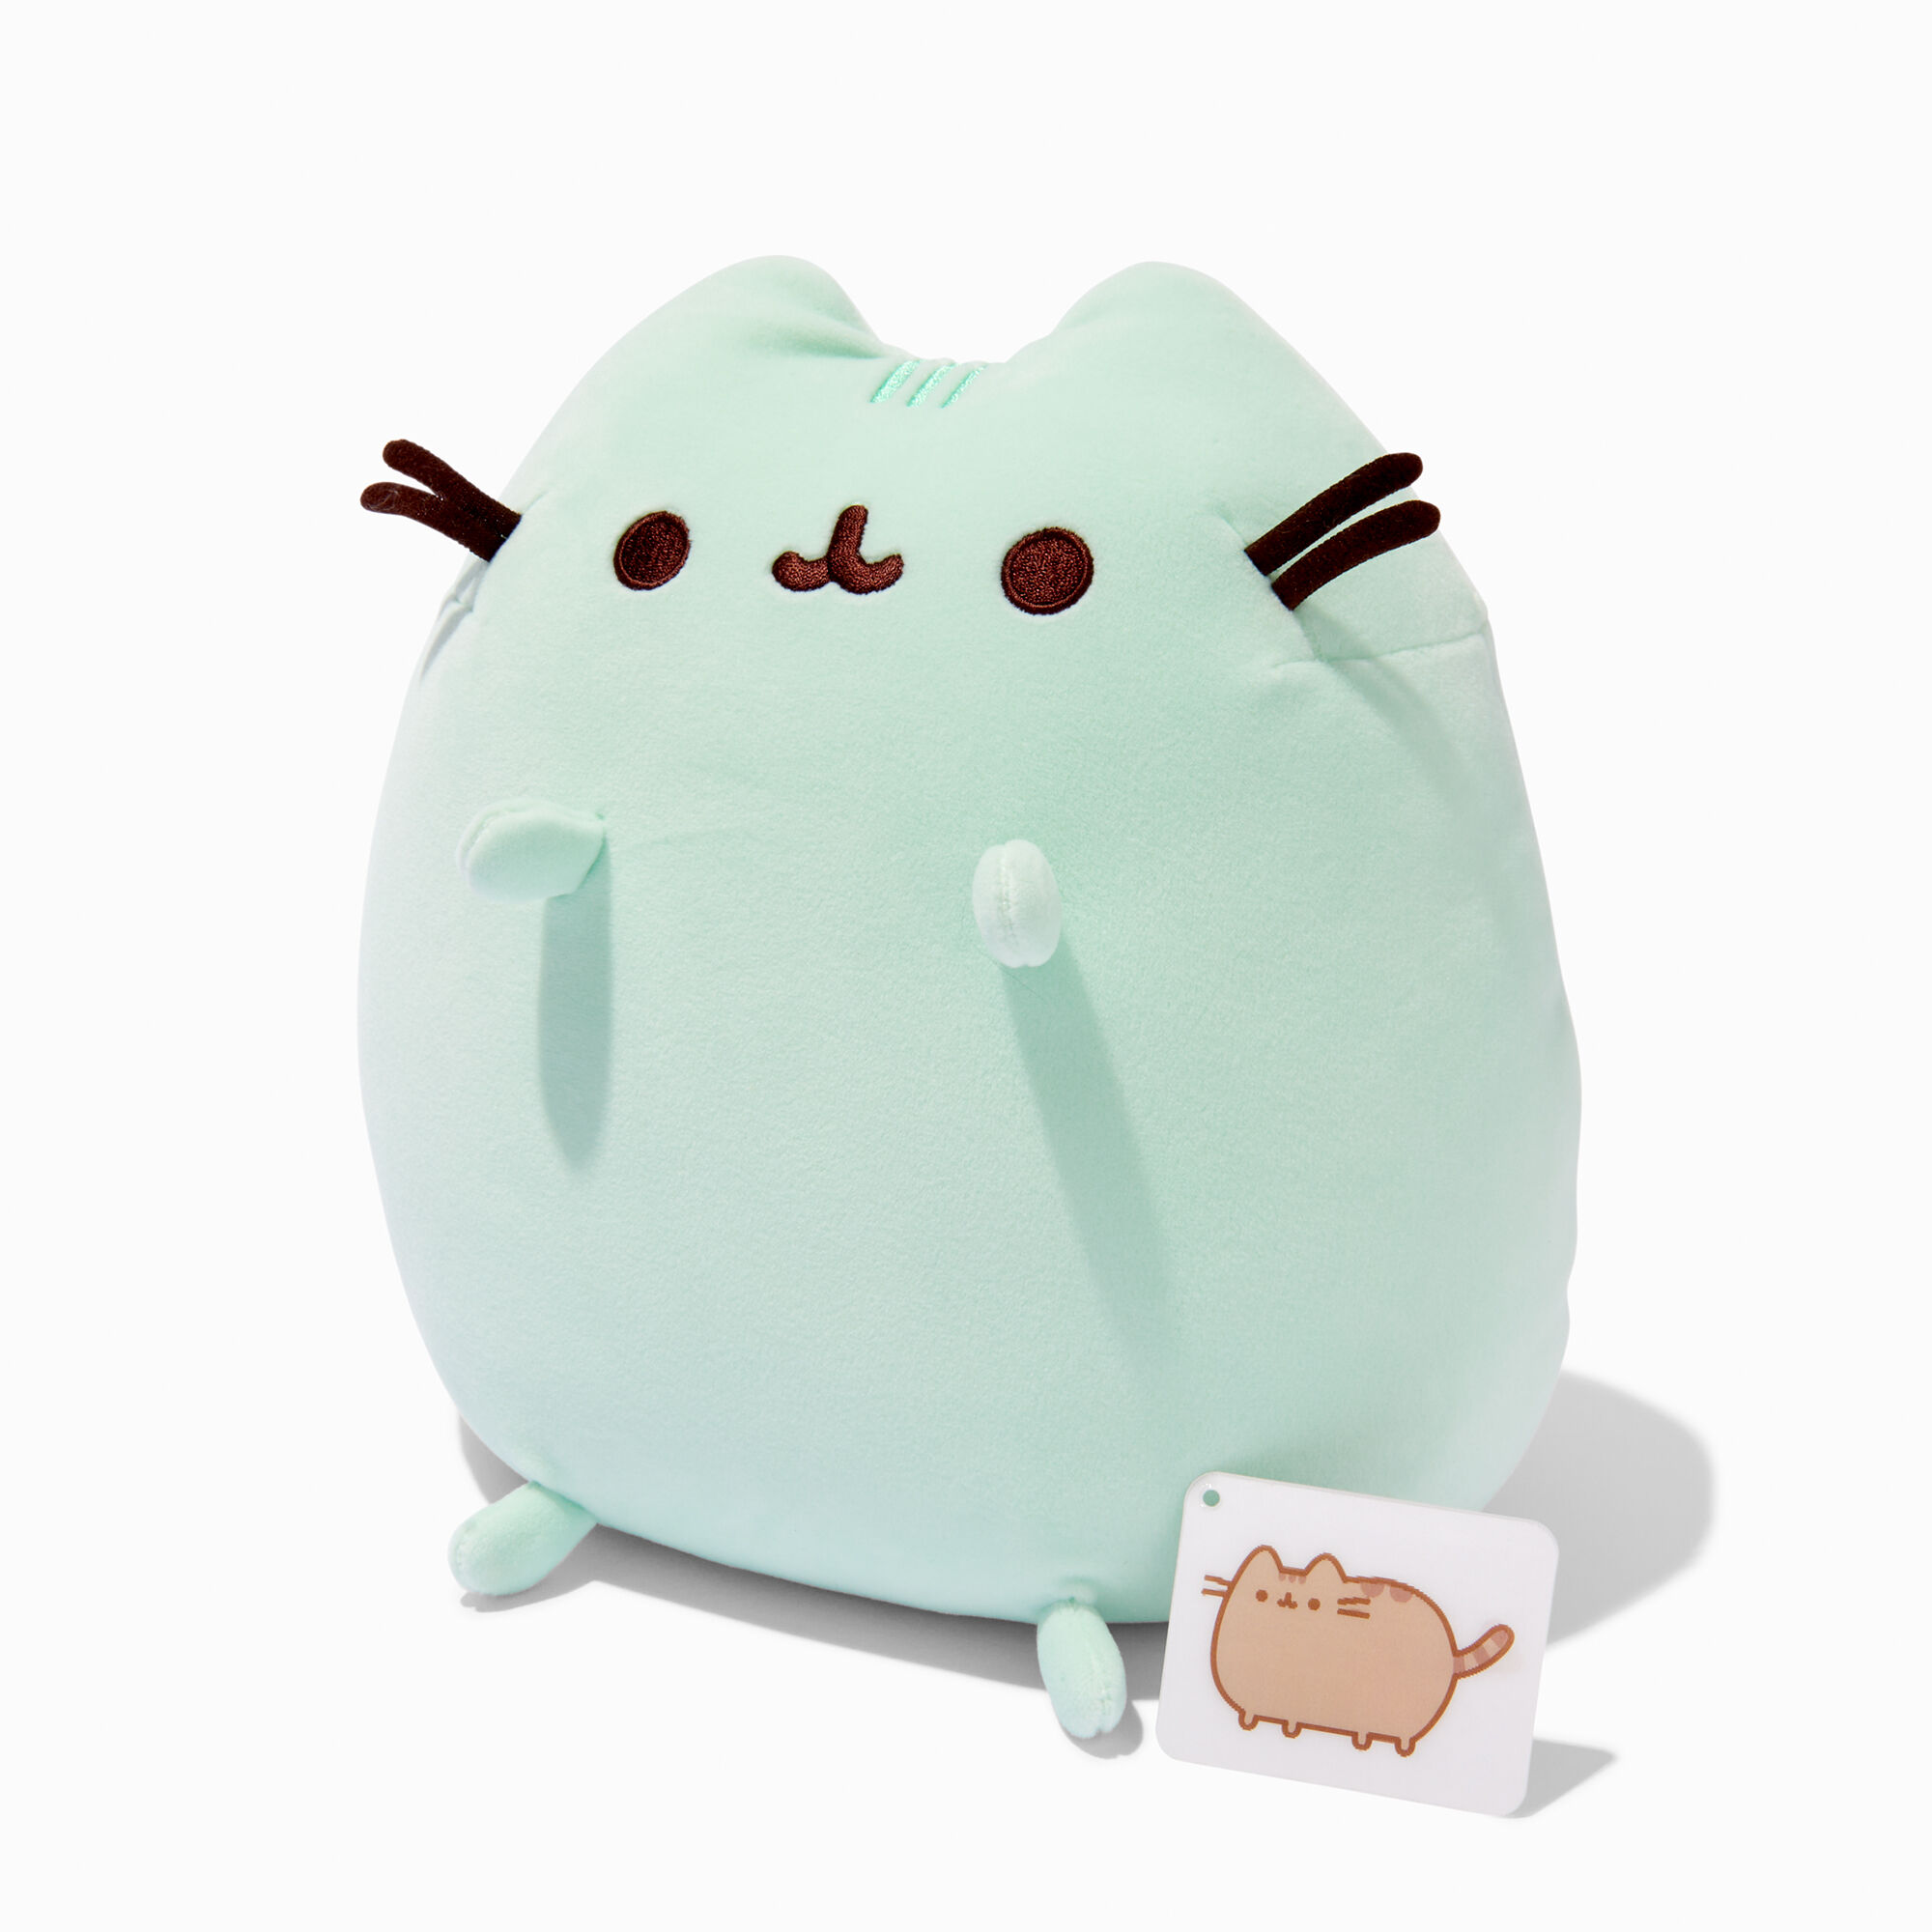 View Claires Pusheen 11 Squisheen Soft Toy Mint information